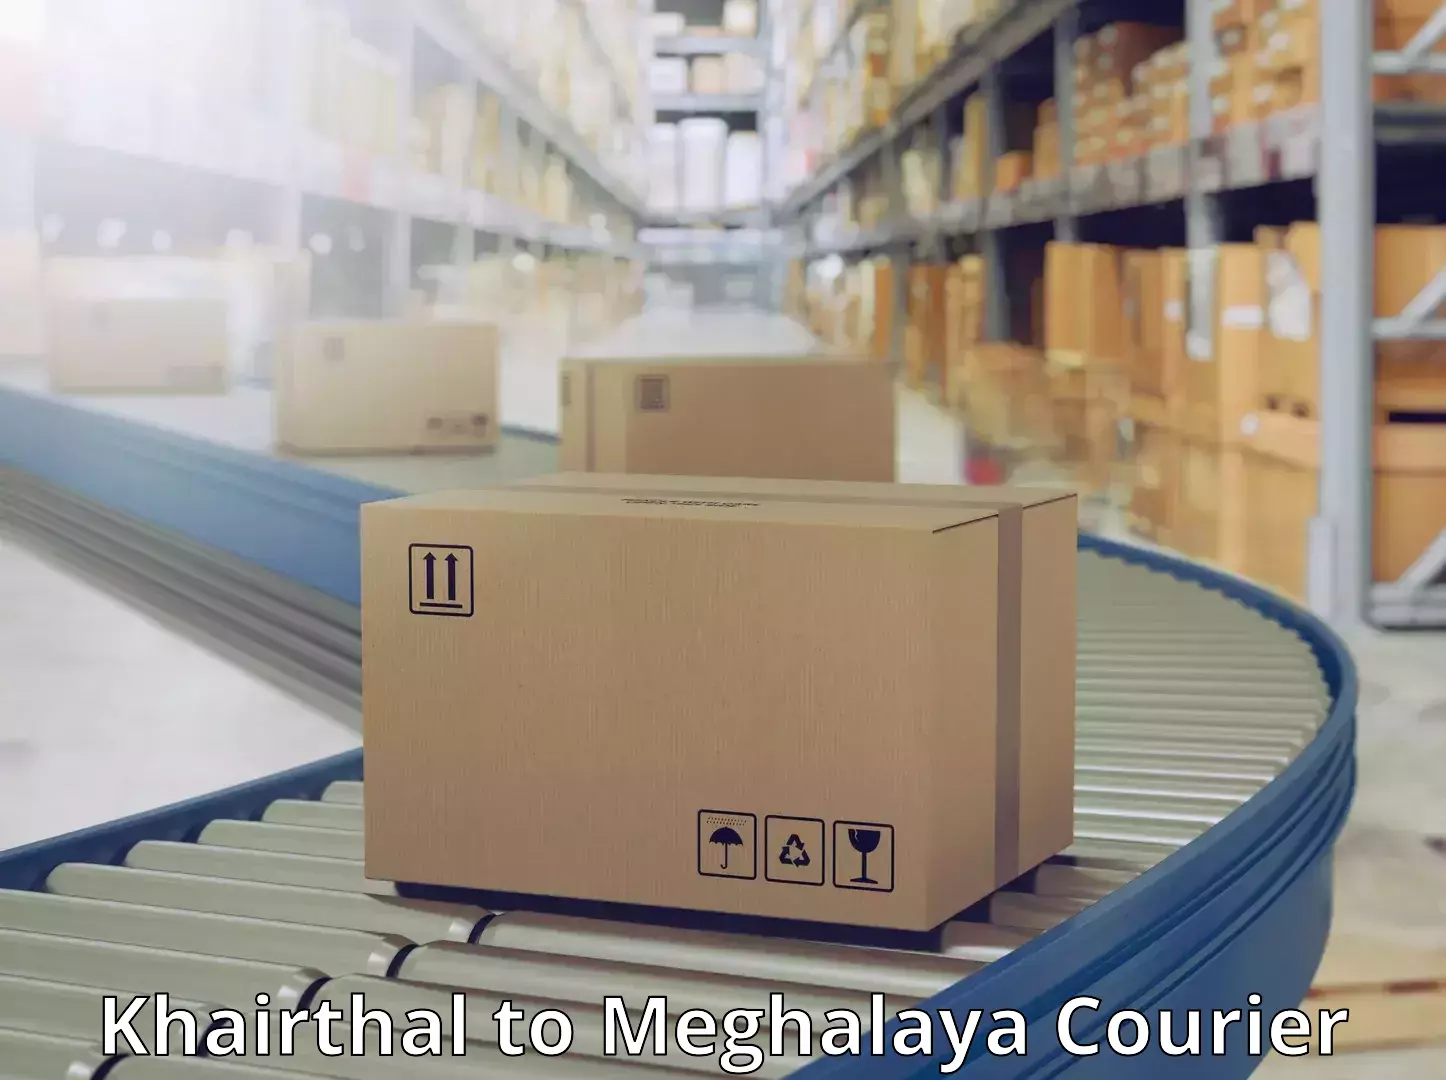 24-hour courier services Khairthal to Meghalaya